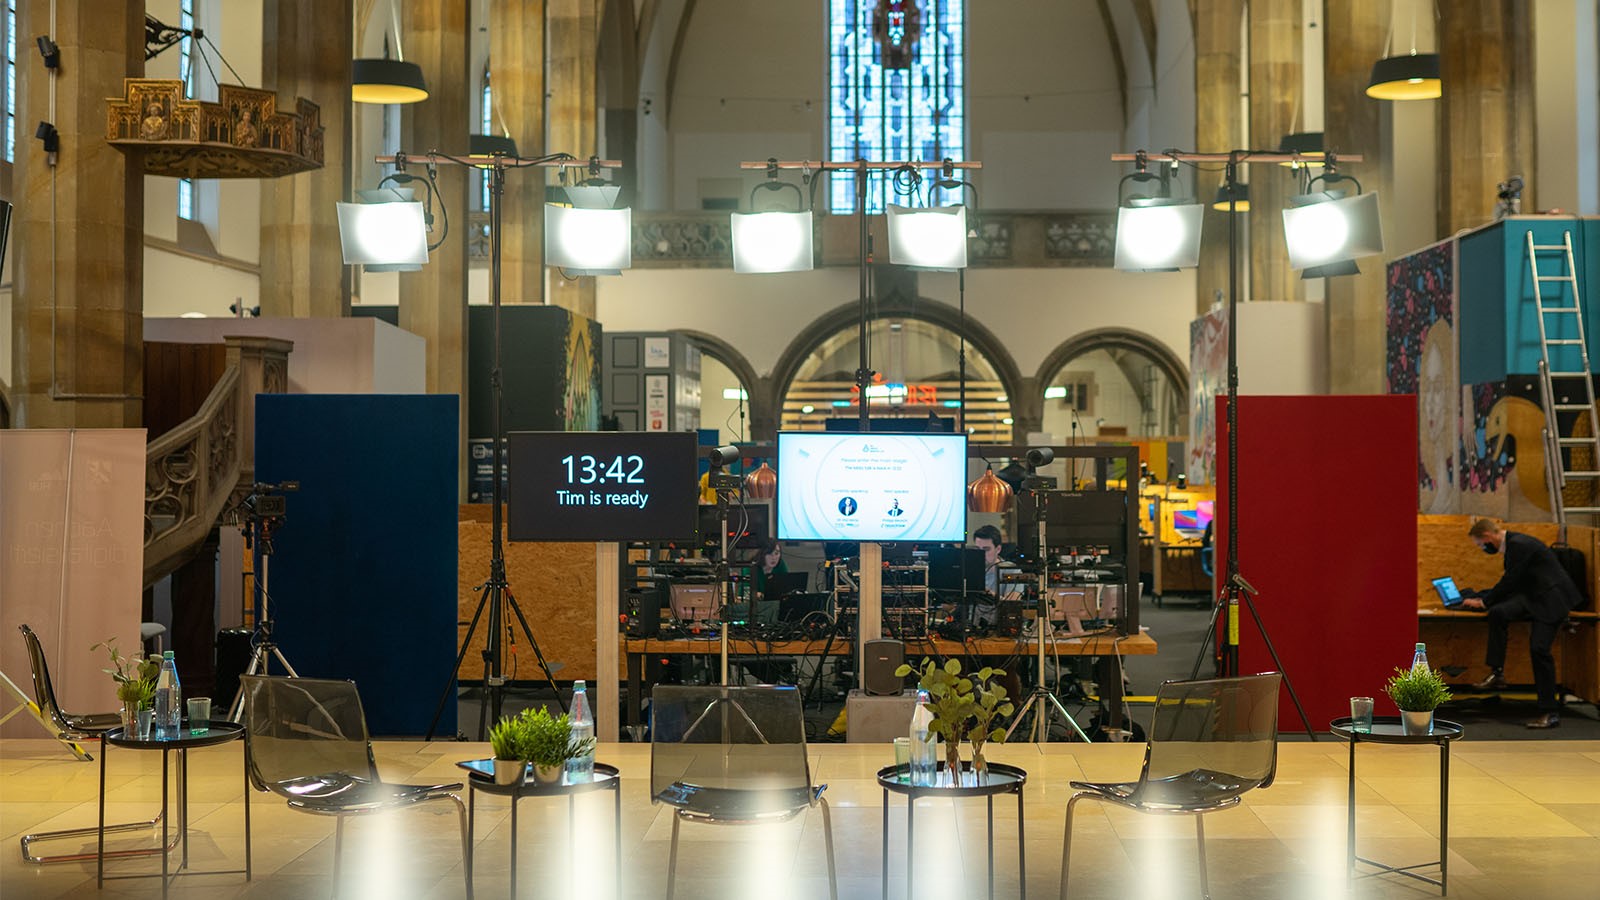 Lobby of All About Remote 2020 at Digital Church Aachen